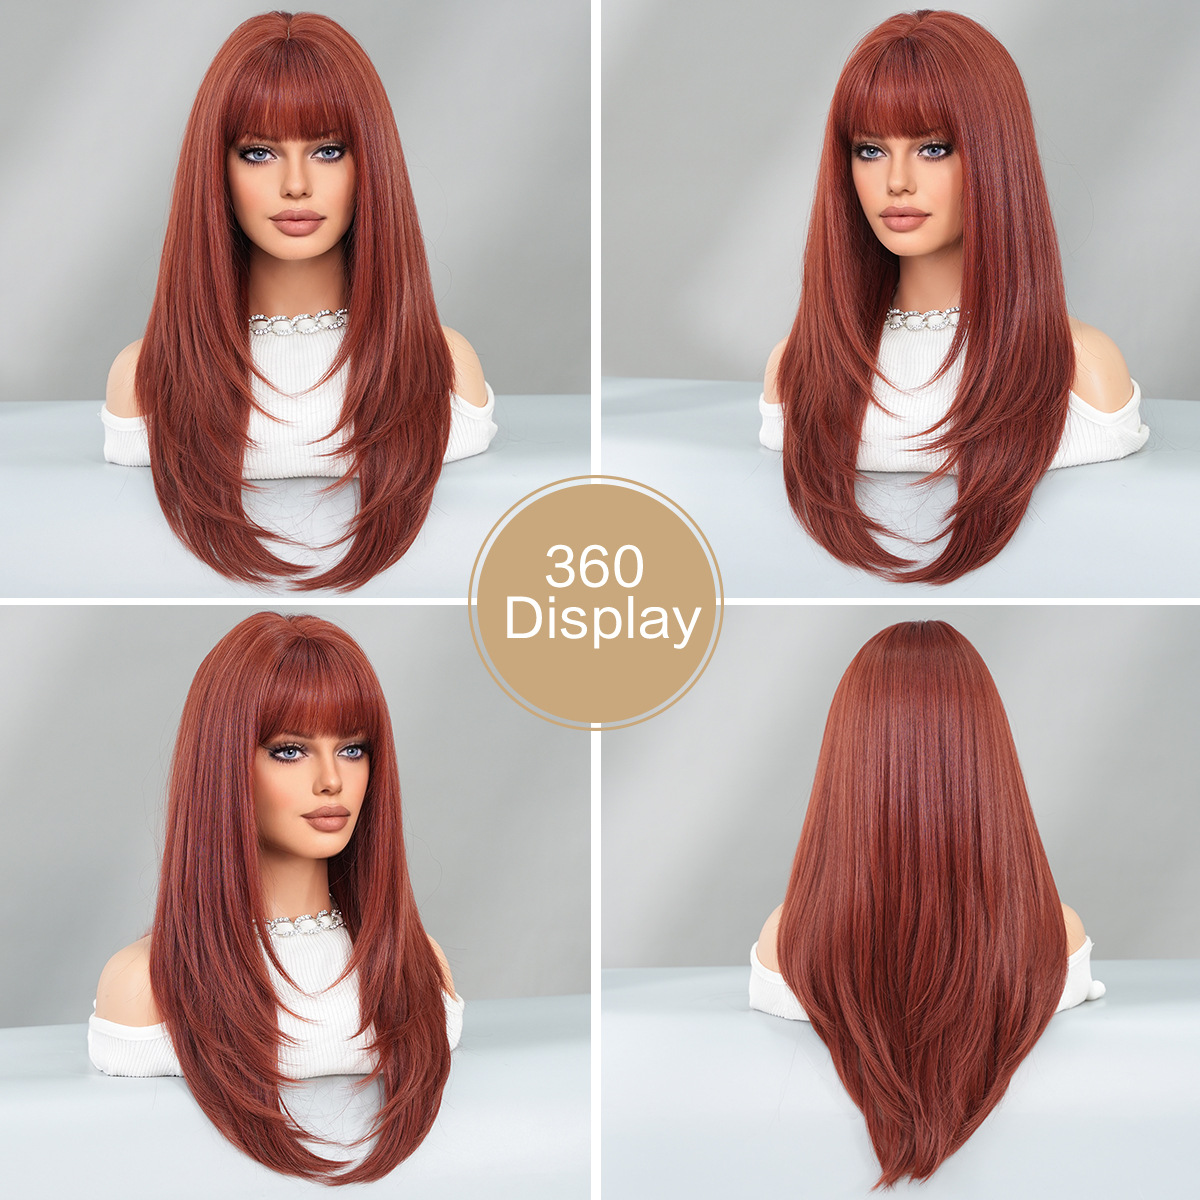 A fashion-forward synthetic wig with long curly wine red hair, ideal for those seeking a trendy style